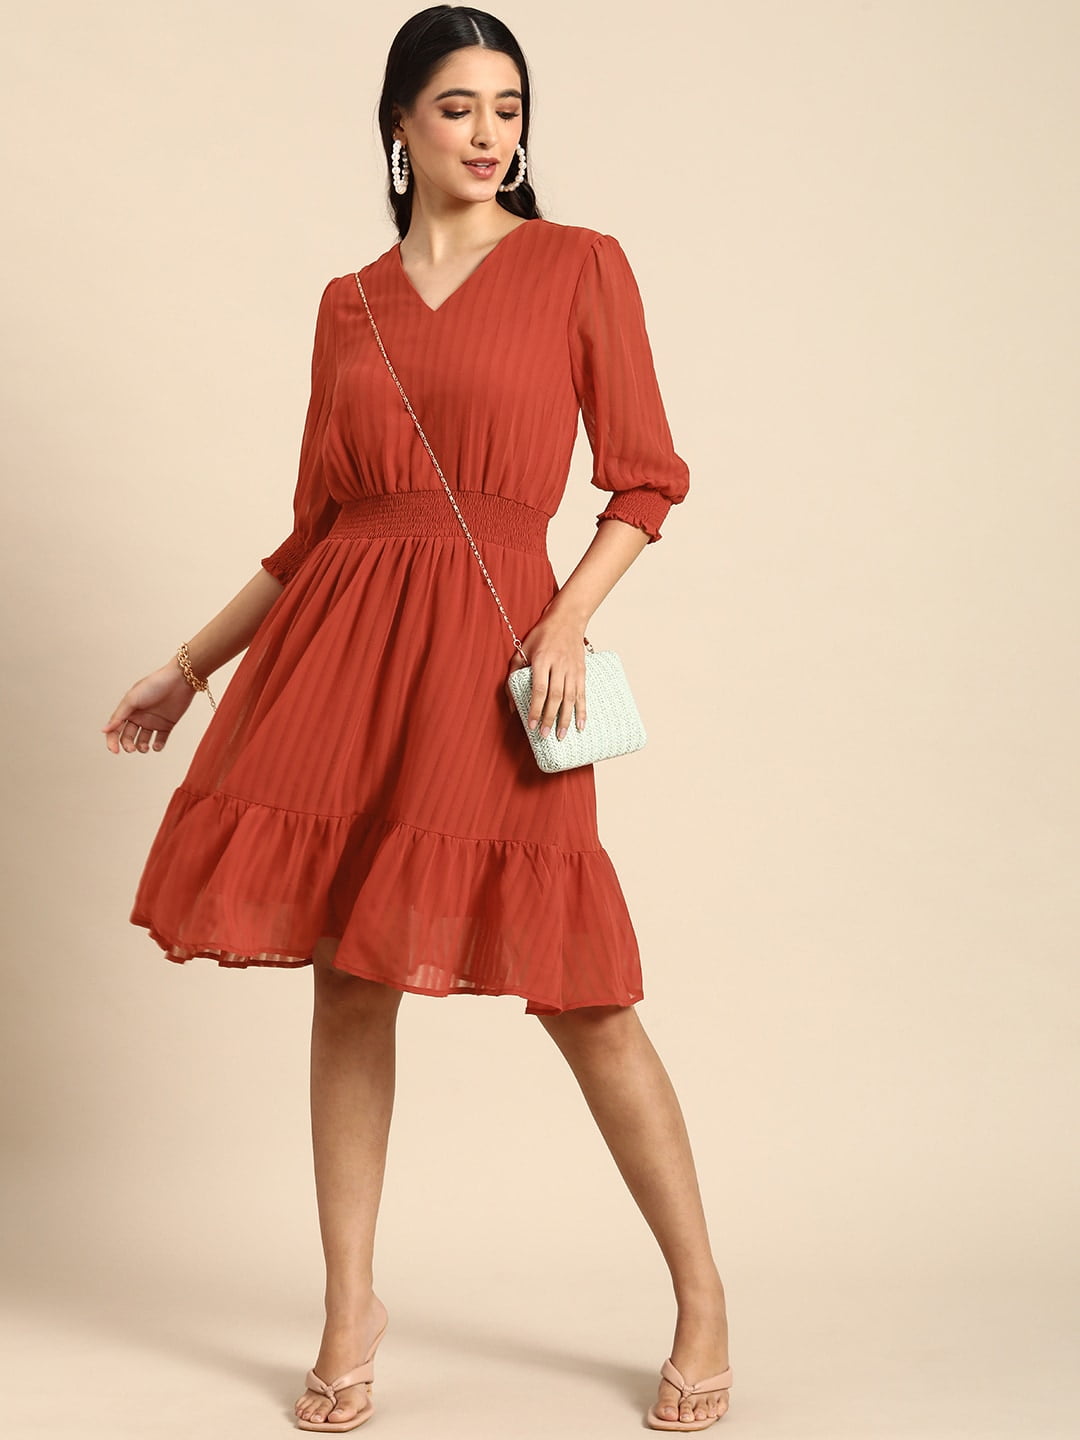 25 Puff Sleeve Dresses for an Easy Summer Statement